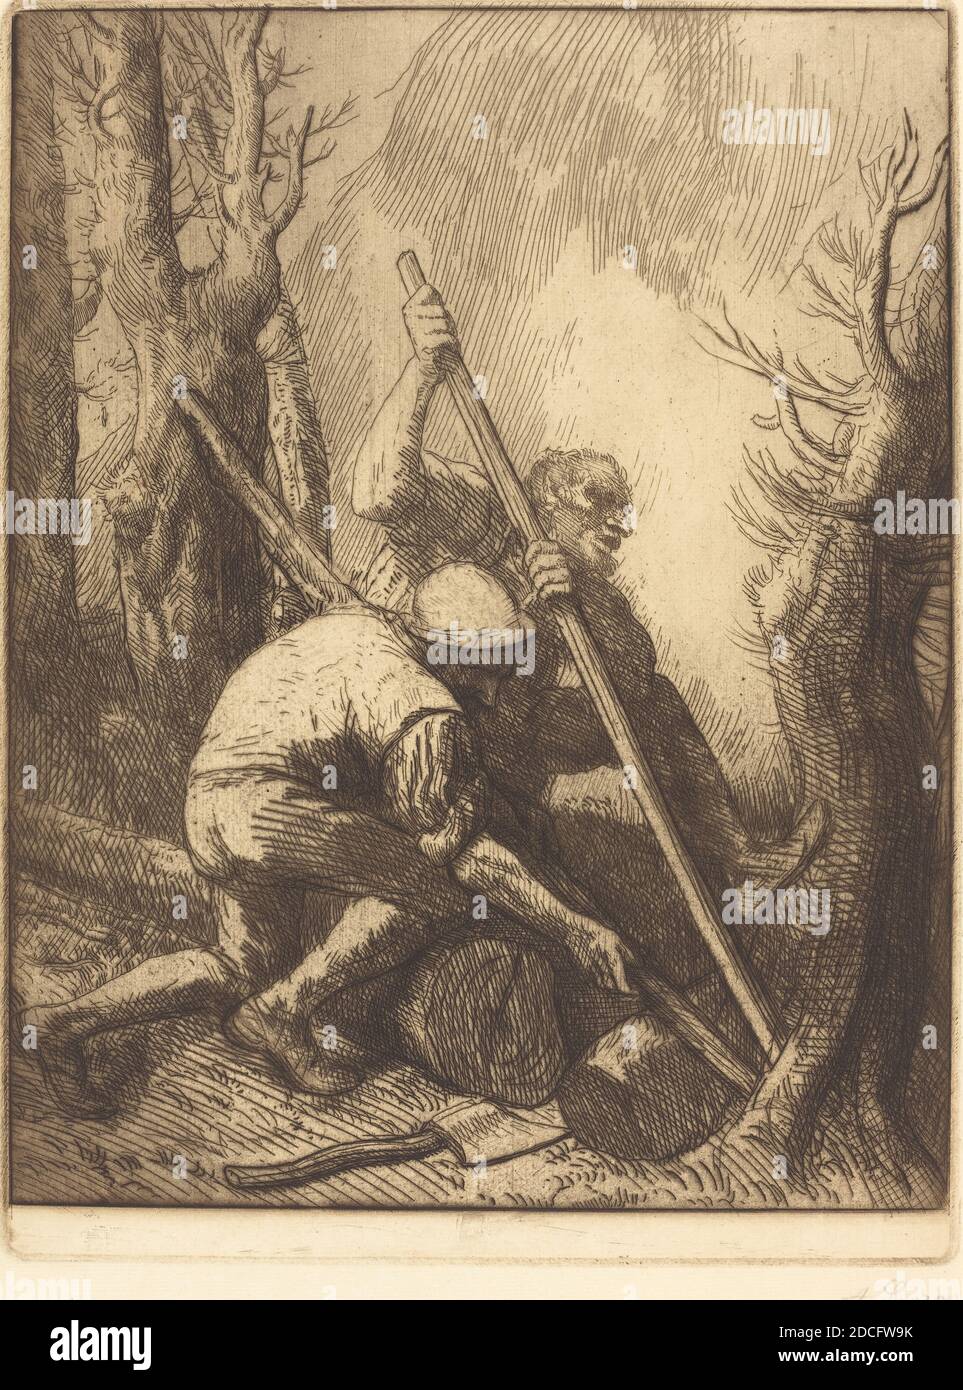 Alphonse Legros, (artist), French, 1837 - 1911, Woodcutters, 3rd plate (Les bucherons), etching in dark brown ink Stock Photo